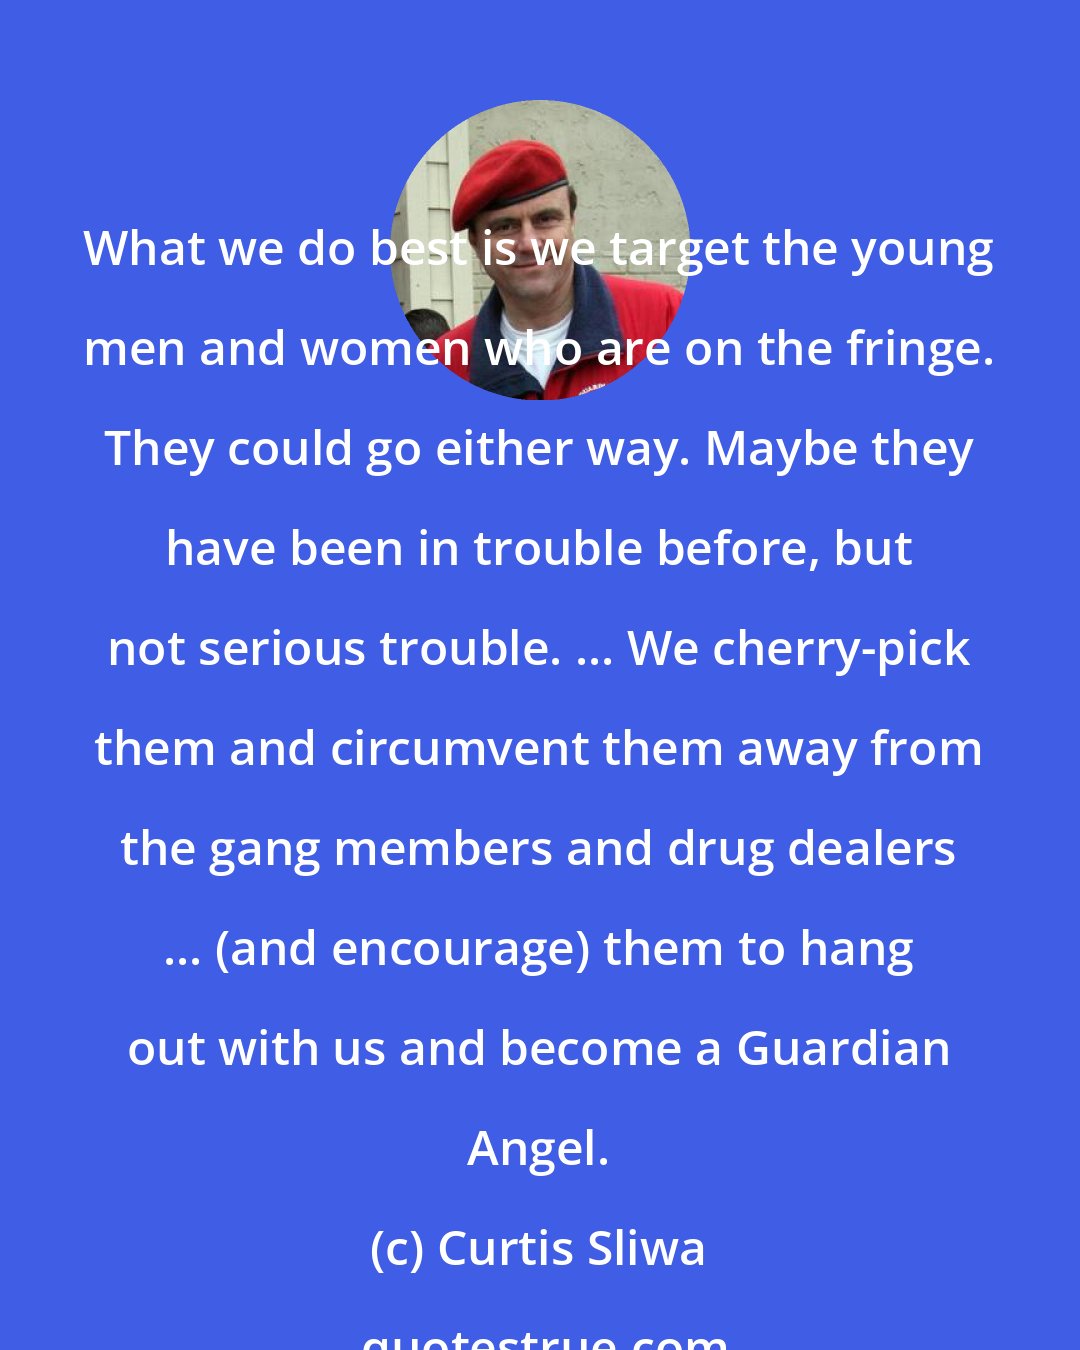 Curtis Sliwa: What we do best is we target the young men and women who are on the fringe. They could go either way. Maybe they have been in trouble before, but not serious trouble. ... We cherry-pick them and circumvent them away from the gang members and drug dealers ... (and encourage) them to hang out with us and become a Guardian Angel.